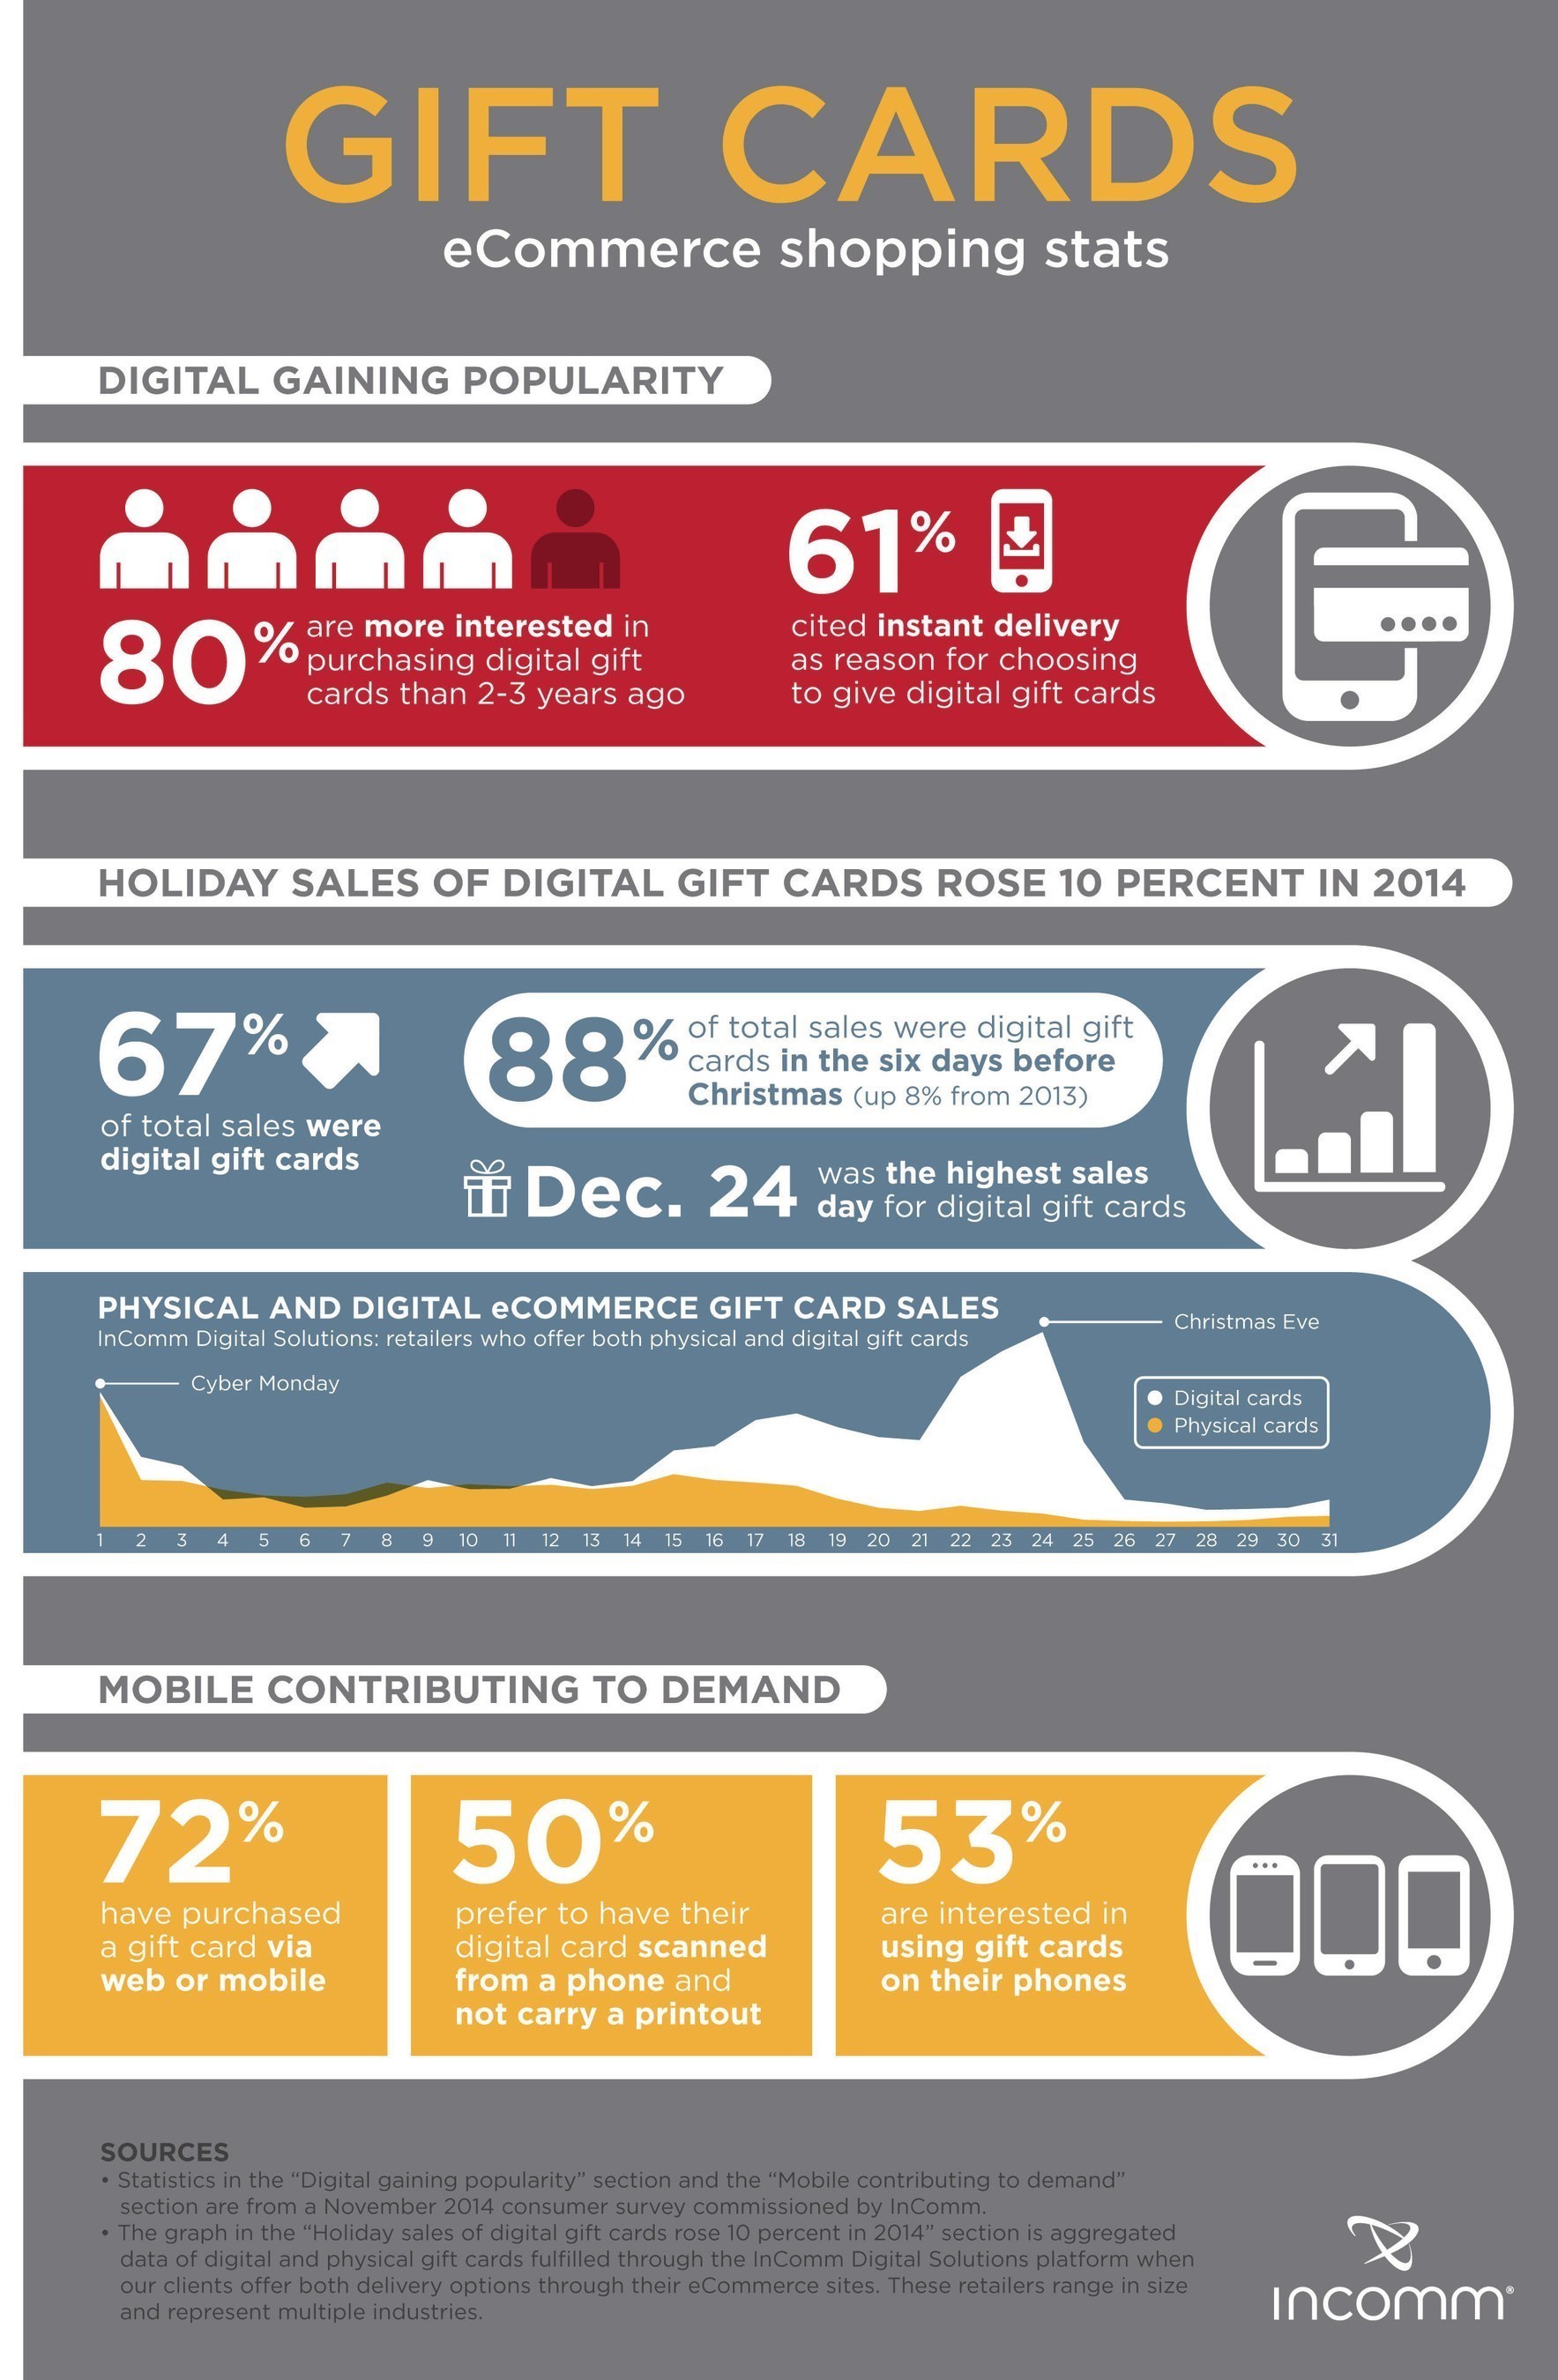 Incomm Digital Solutions Ecommerce Ping Stats For Gift Cards Show Is On The Rise